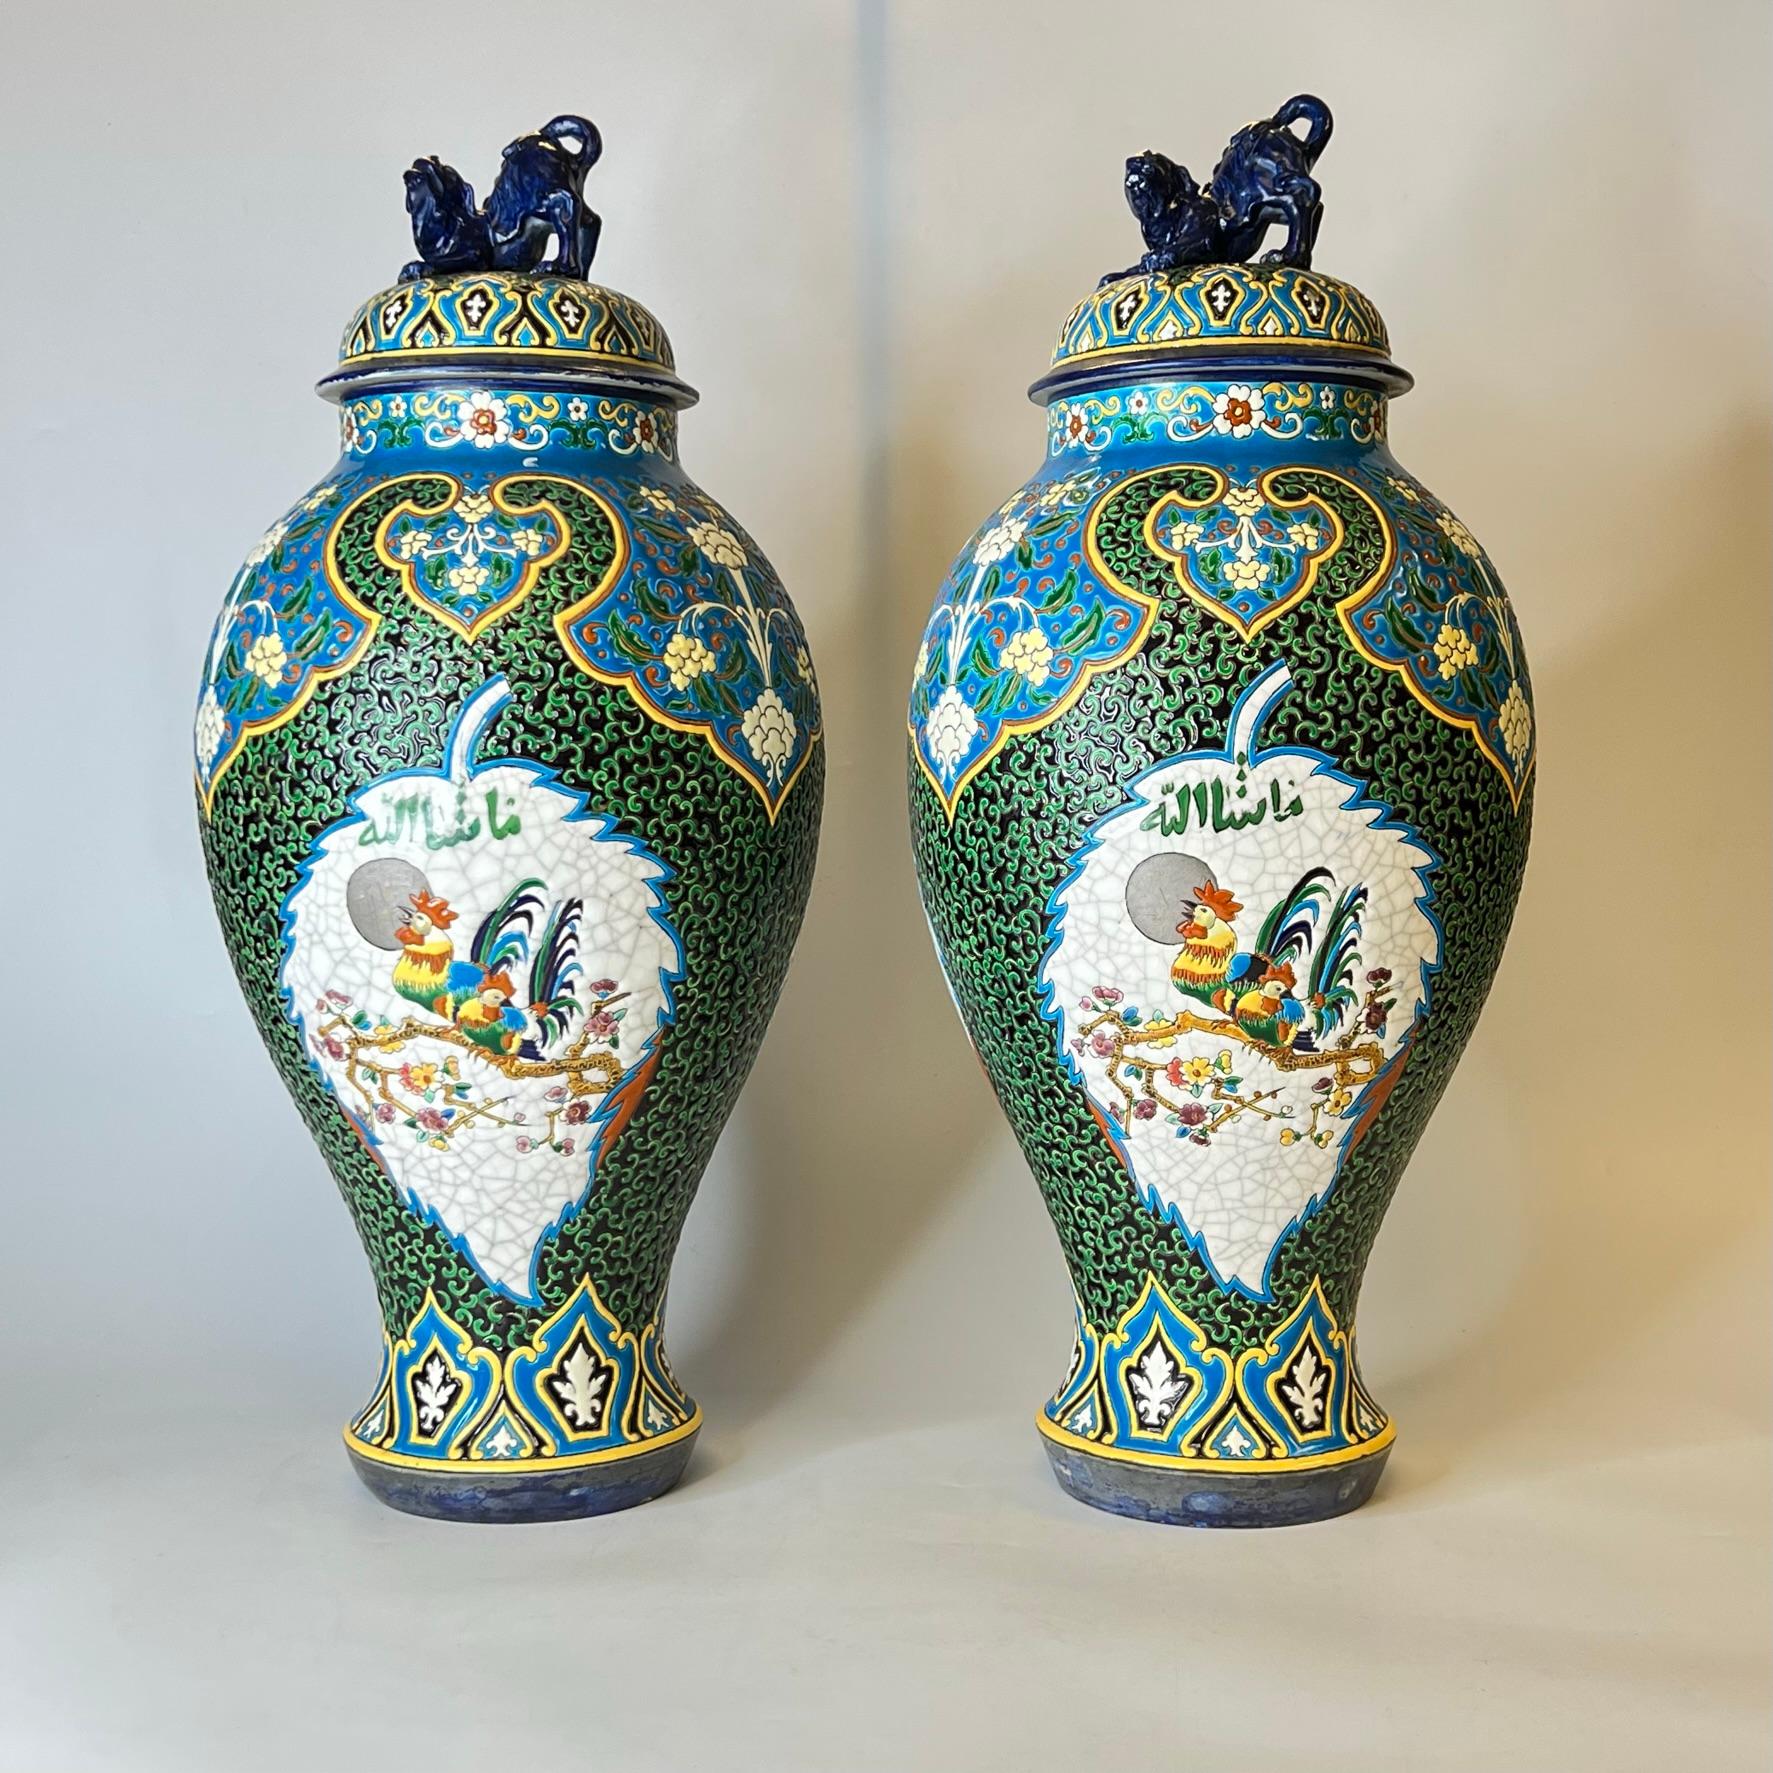 Pair 19th Century French Faience Vases by J. Vieillard & Co with Islamic Motifs with lids featuring crouching foo dogs and cartouches depicting water foul and roosters, and inscribed Mashallah (God has willed it).  Very rare.